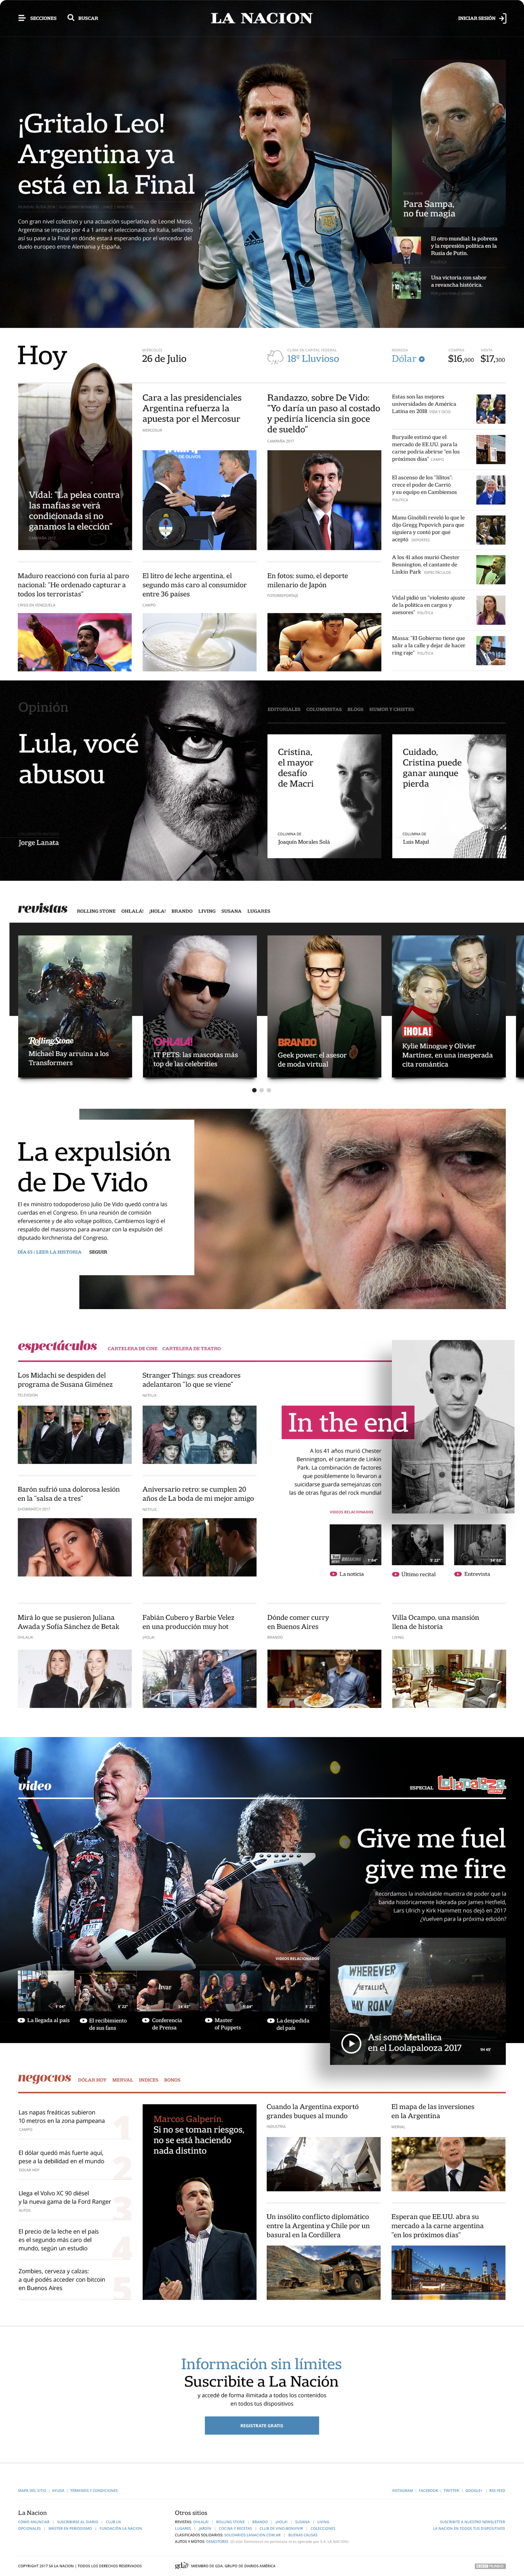 Image of the desing proposal for the La Nacion website homepage